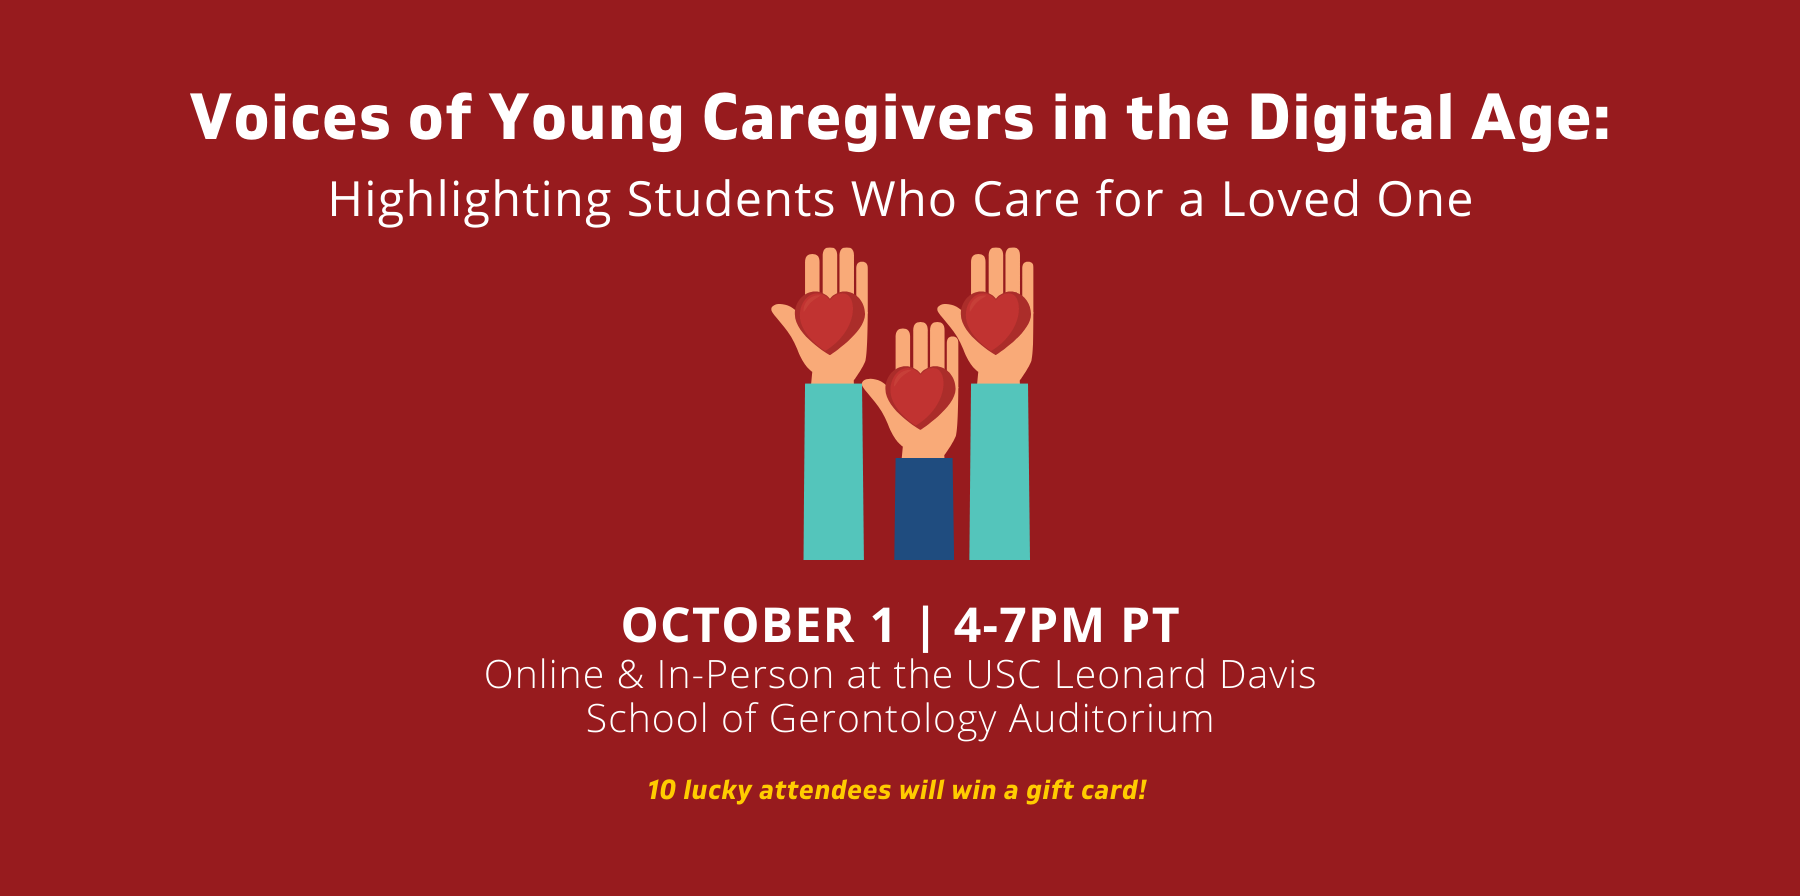 Register for the The Voices of Young Caregivers in the Digital Age Event